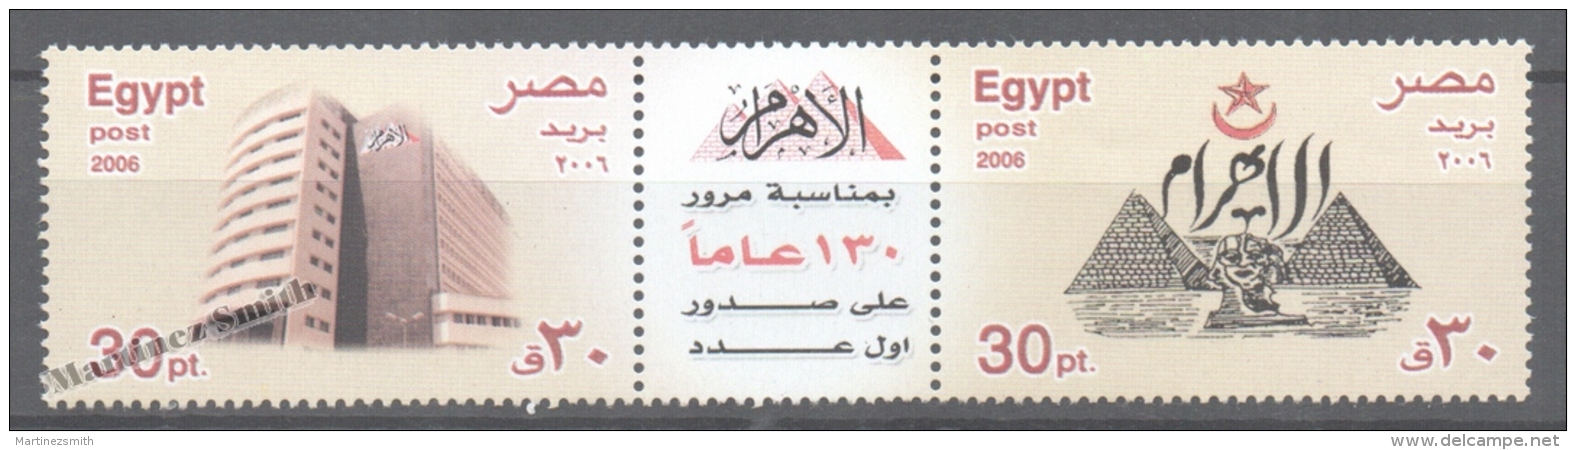 Egypt 2006 Yvert 1950-51, 130th Anniv. From The First Publication Of Al Ahram Newspaper - MNH - Used Stamps